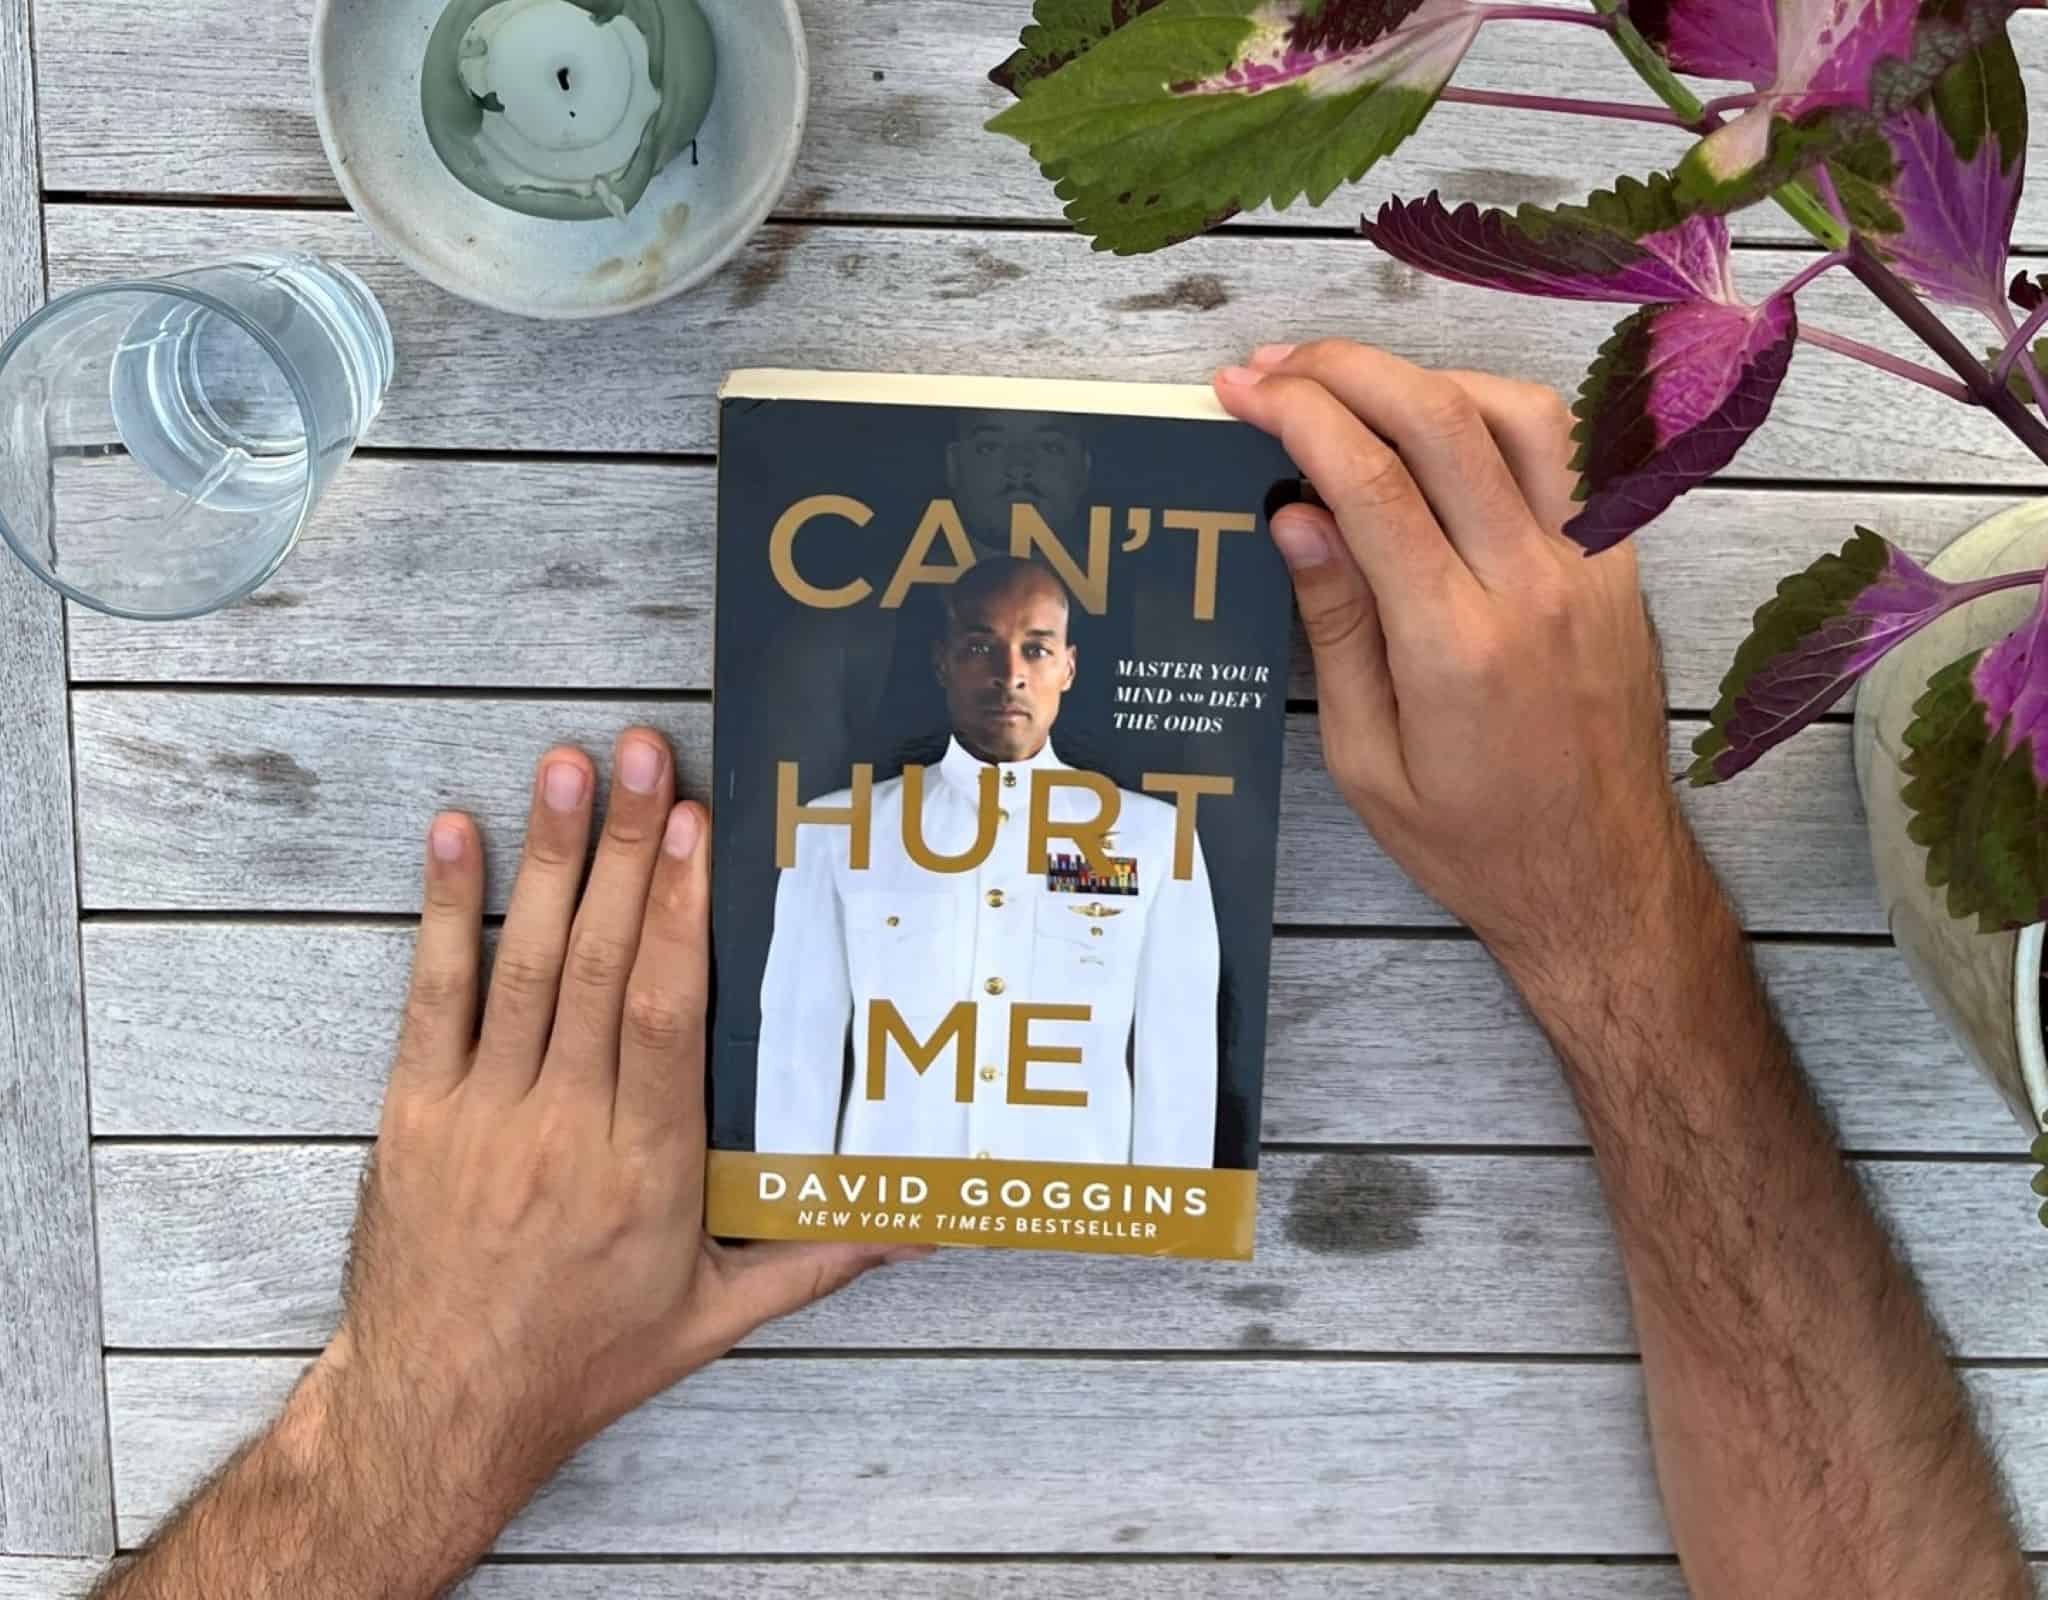 Summary: Can’t Hurt Me by David Goggins